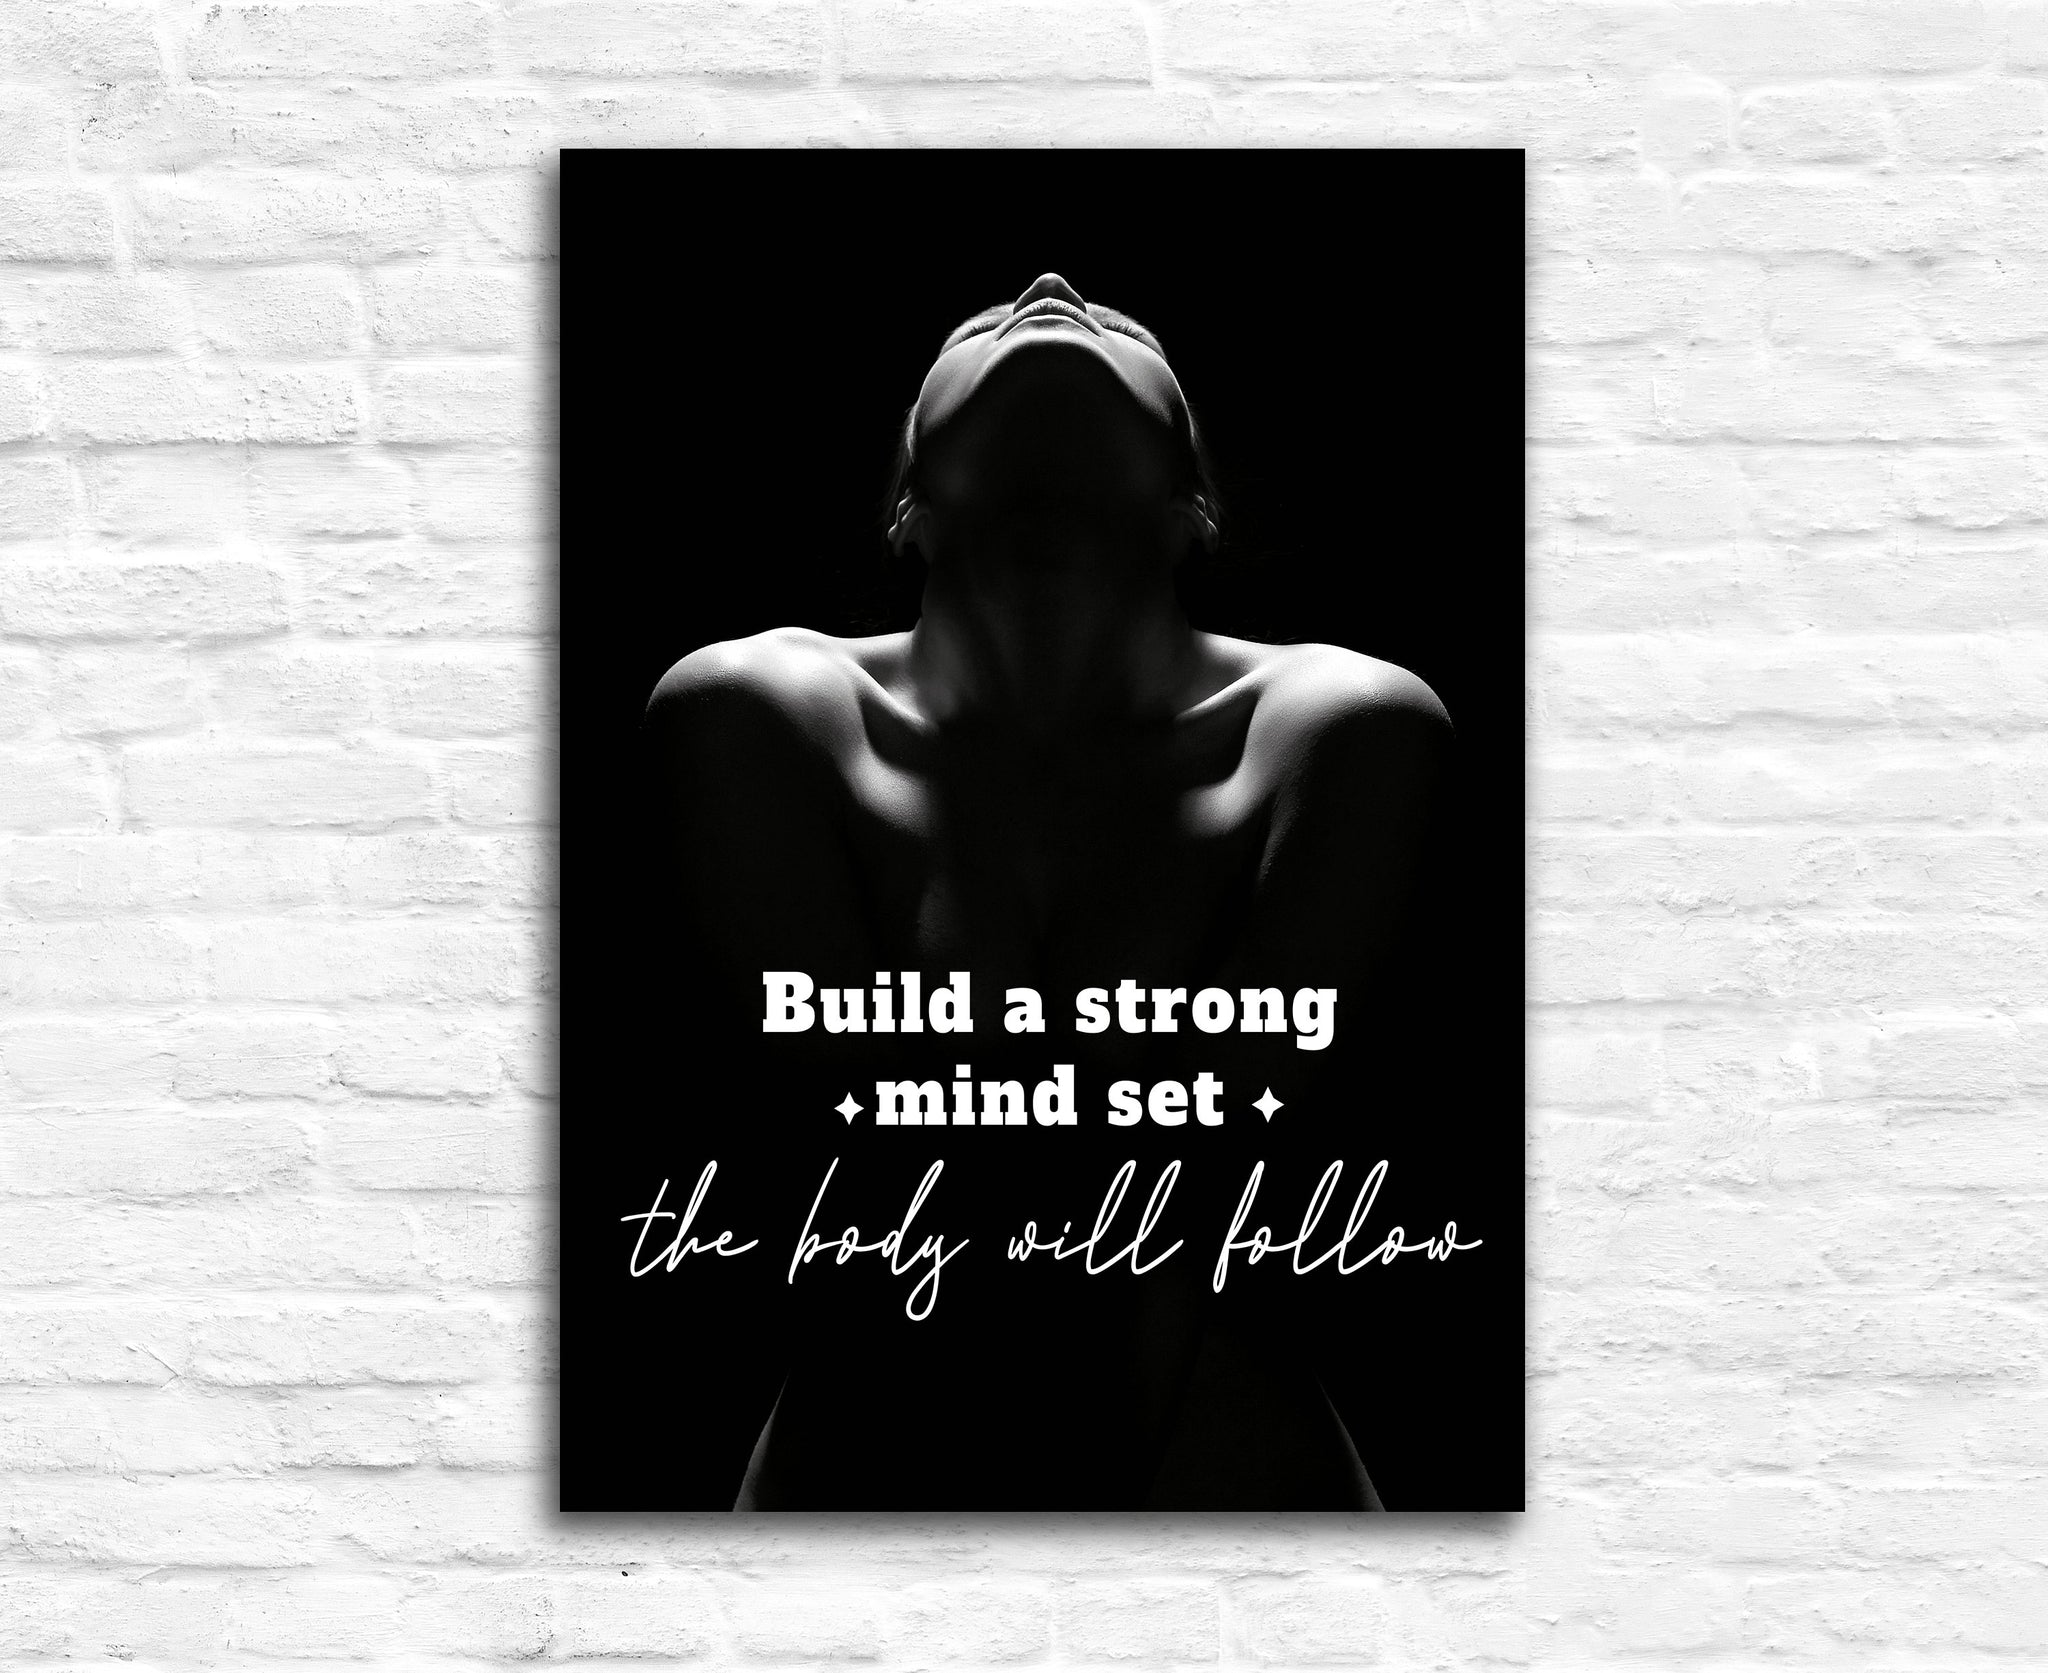 Gym wall art, Gym Poster, Gym quote, Gym Décor, Home gym, Home gym décor, Home gym poster, Inspired poster, Fitness décor,Motivational quote